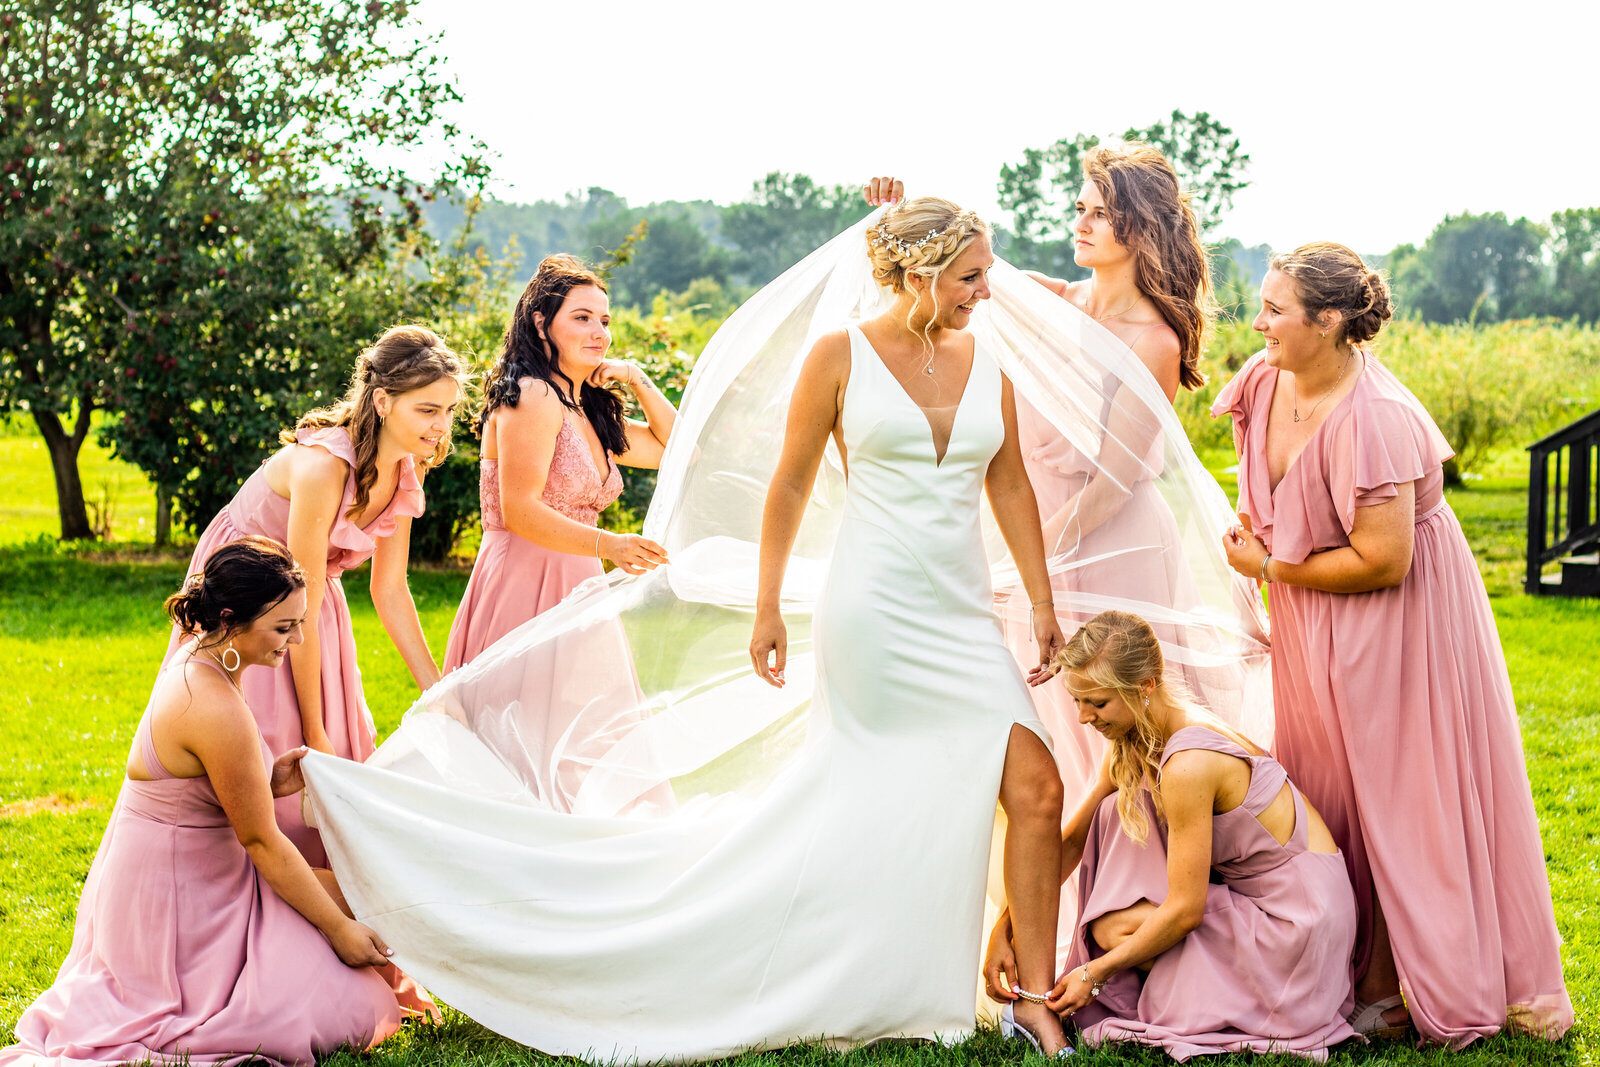 Bridesmaids in pink dresses fixing and fluffing the bride's dress. Photo by Devin Ramon Photography.